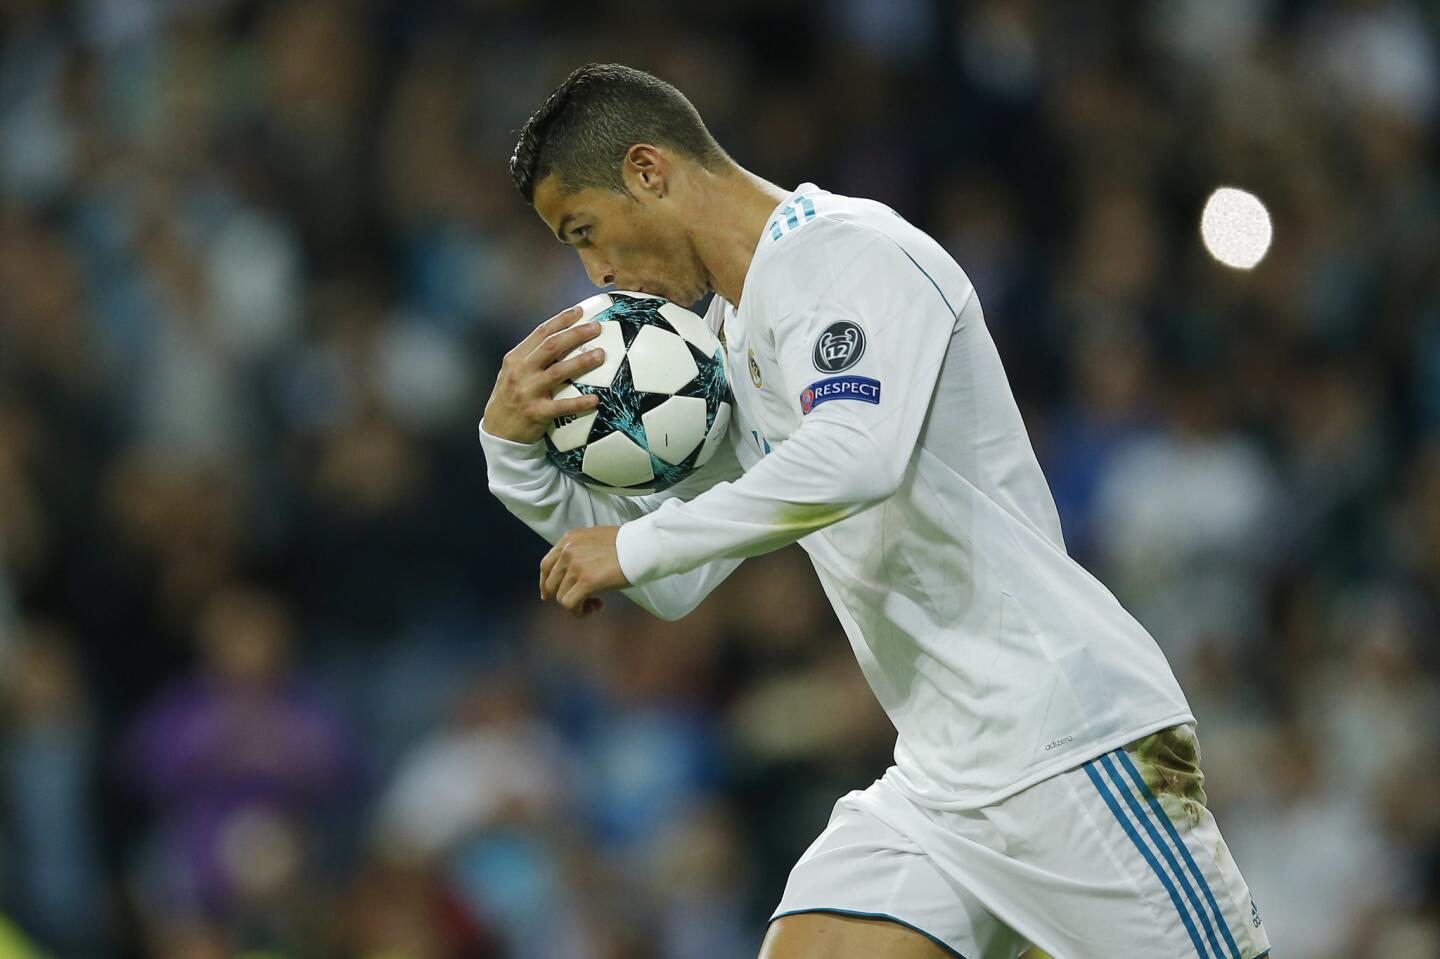 Real Madrid's Cristiano Ronaldo kisses the ball after scoring a penalty during a Group H Champions League soccer match between Real Madrid and Tottenham Hotspur at the Santiago Bernabeu stadium in Madrid, Tuesday Oct. 17, 2017. (AP Photo/Paul White)